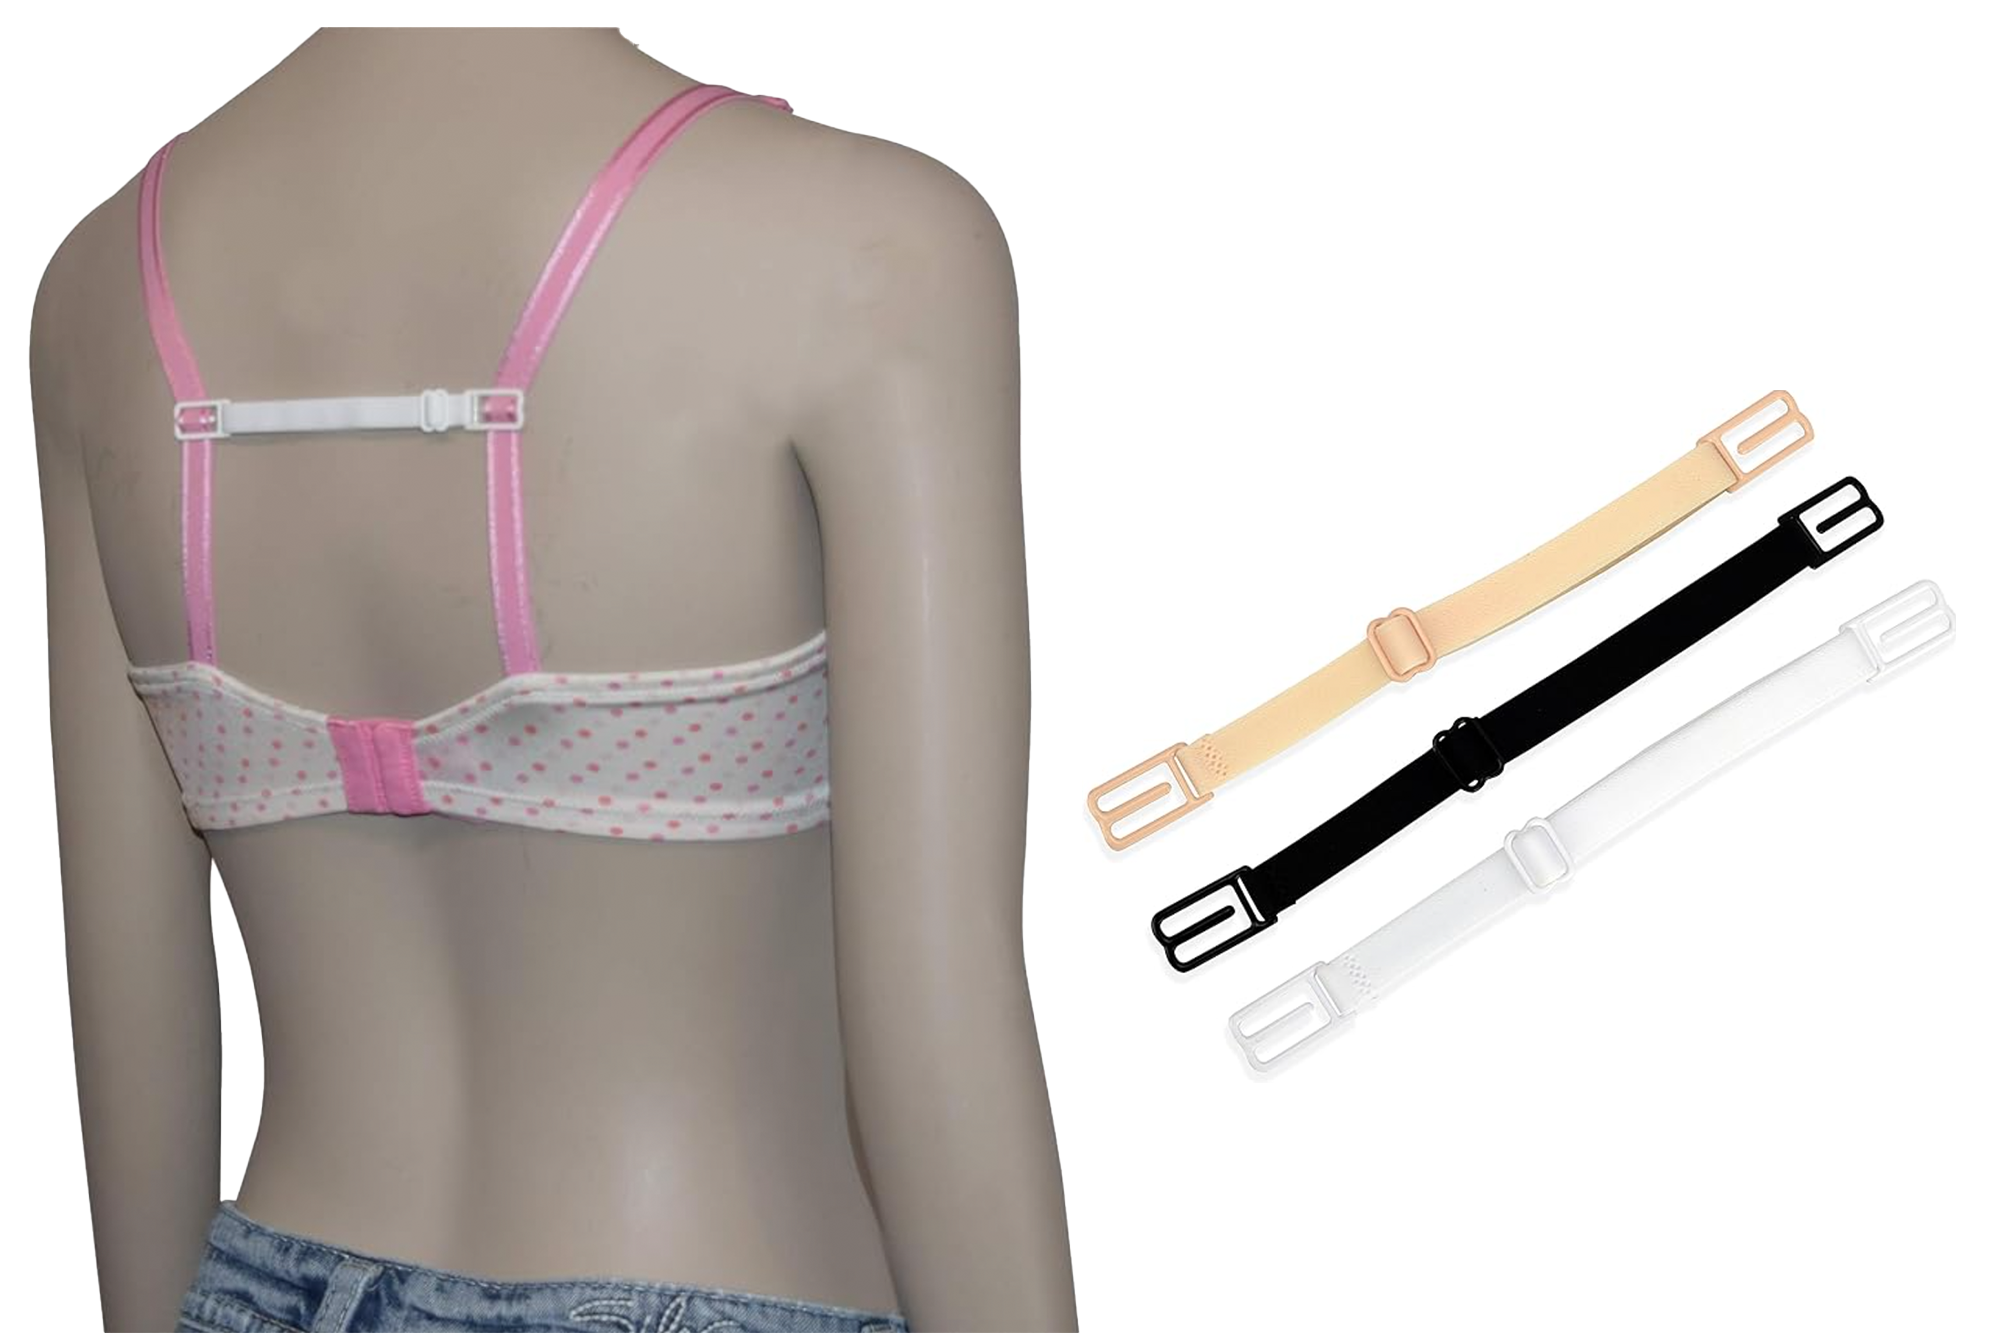 These 'Stretchy' Bra Strap Clips Have Over 3,000 5-Star Reviews